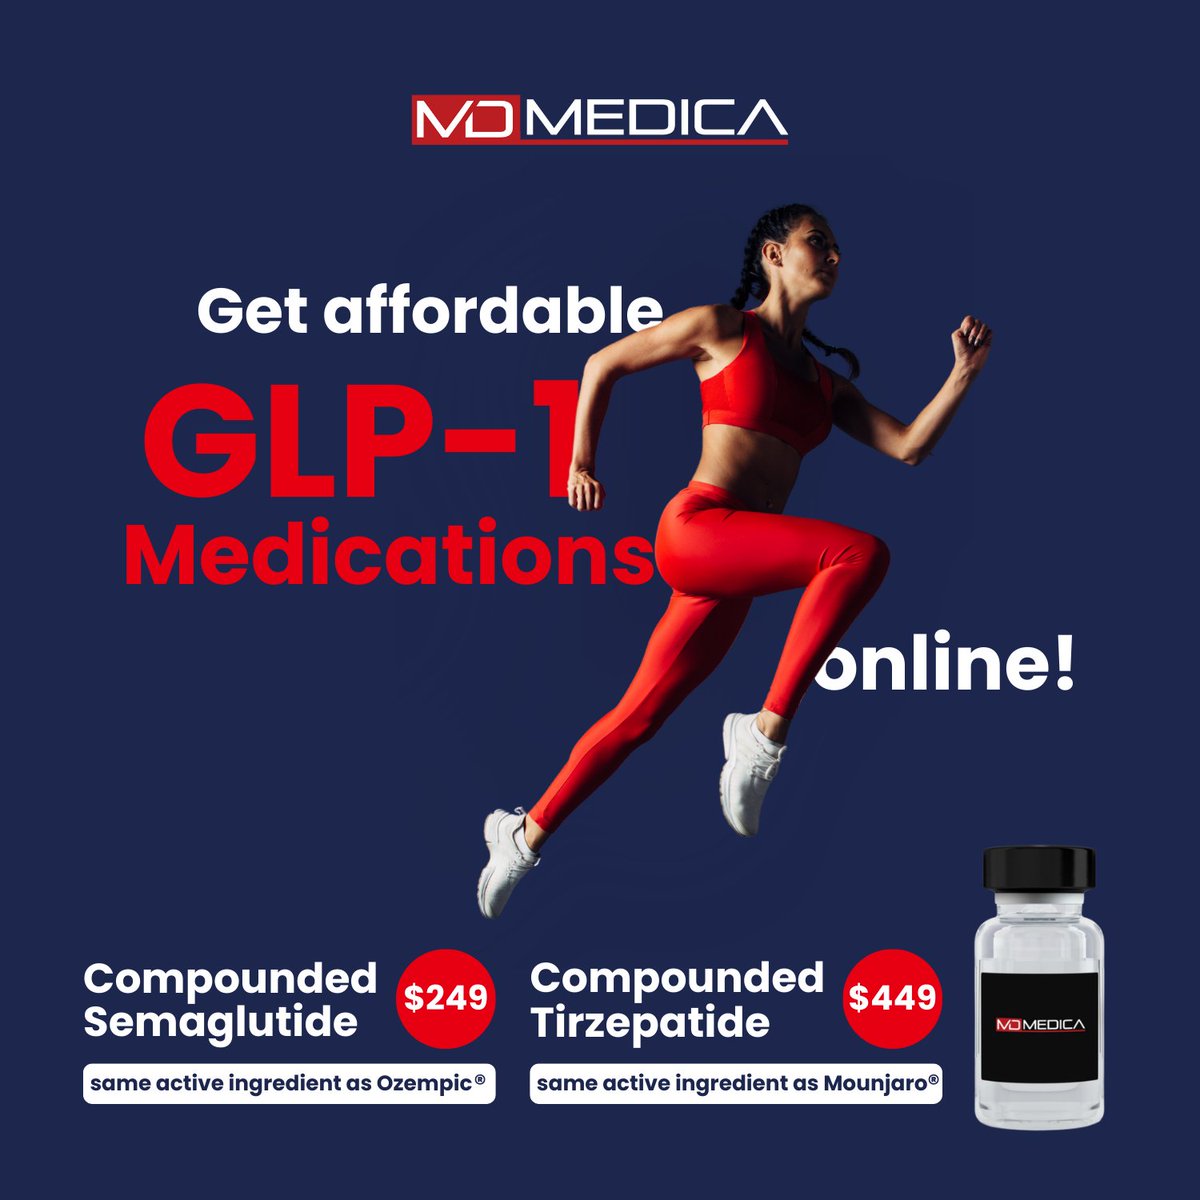 Weight loss injections delivered right to your doorstep. Get started today! 👉 mdmedica.com/weight-loss/ ❤

#WeightLossInjections #Glp1Meds #InjectableWeightLoss #HealthyLiving #WeightLossJourney #MedicalWeightLoss #Glp1Therapy #LoseWeightWithInjections #SlimmingShots